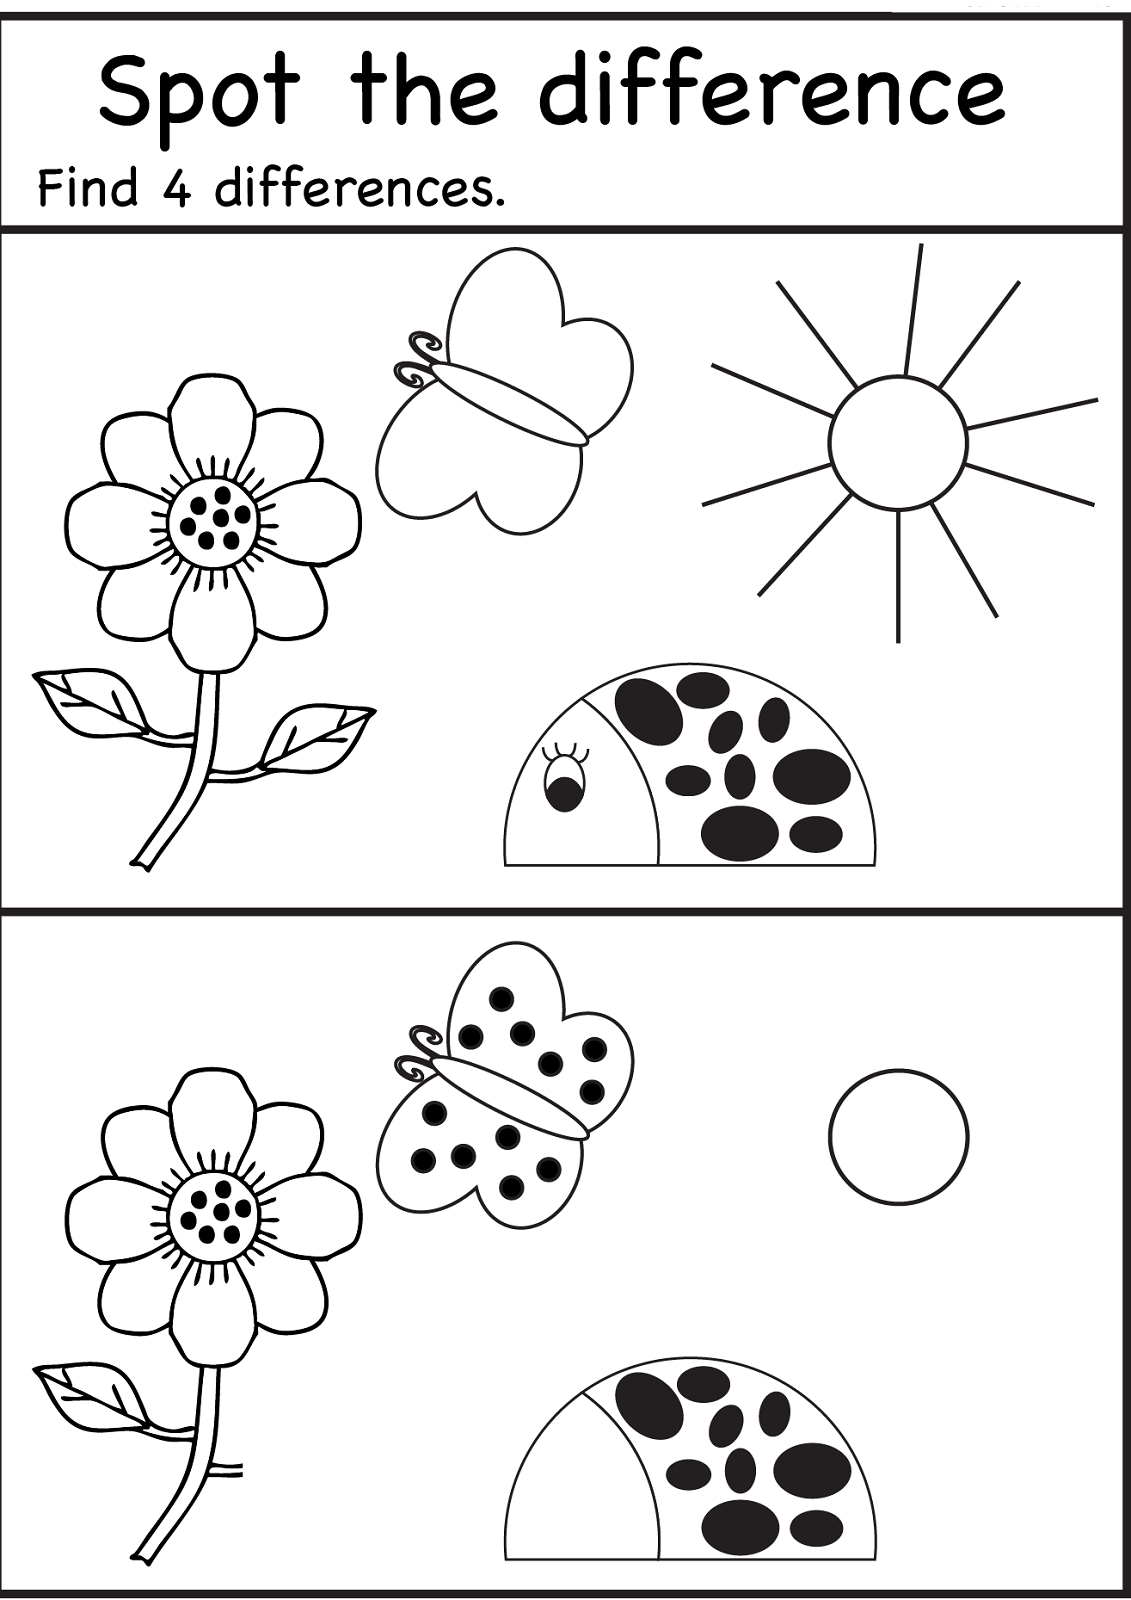 Spot The Difference Worksheets For Kids | Spot The . Games - Free Printable Spot The Difference Worksheets